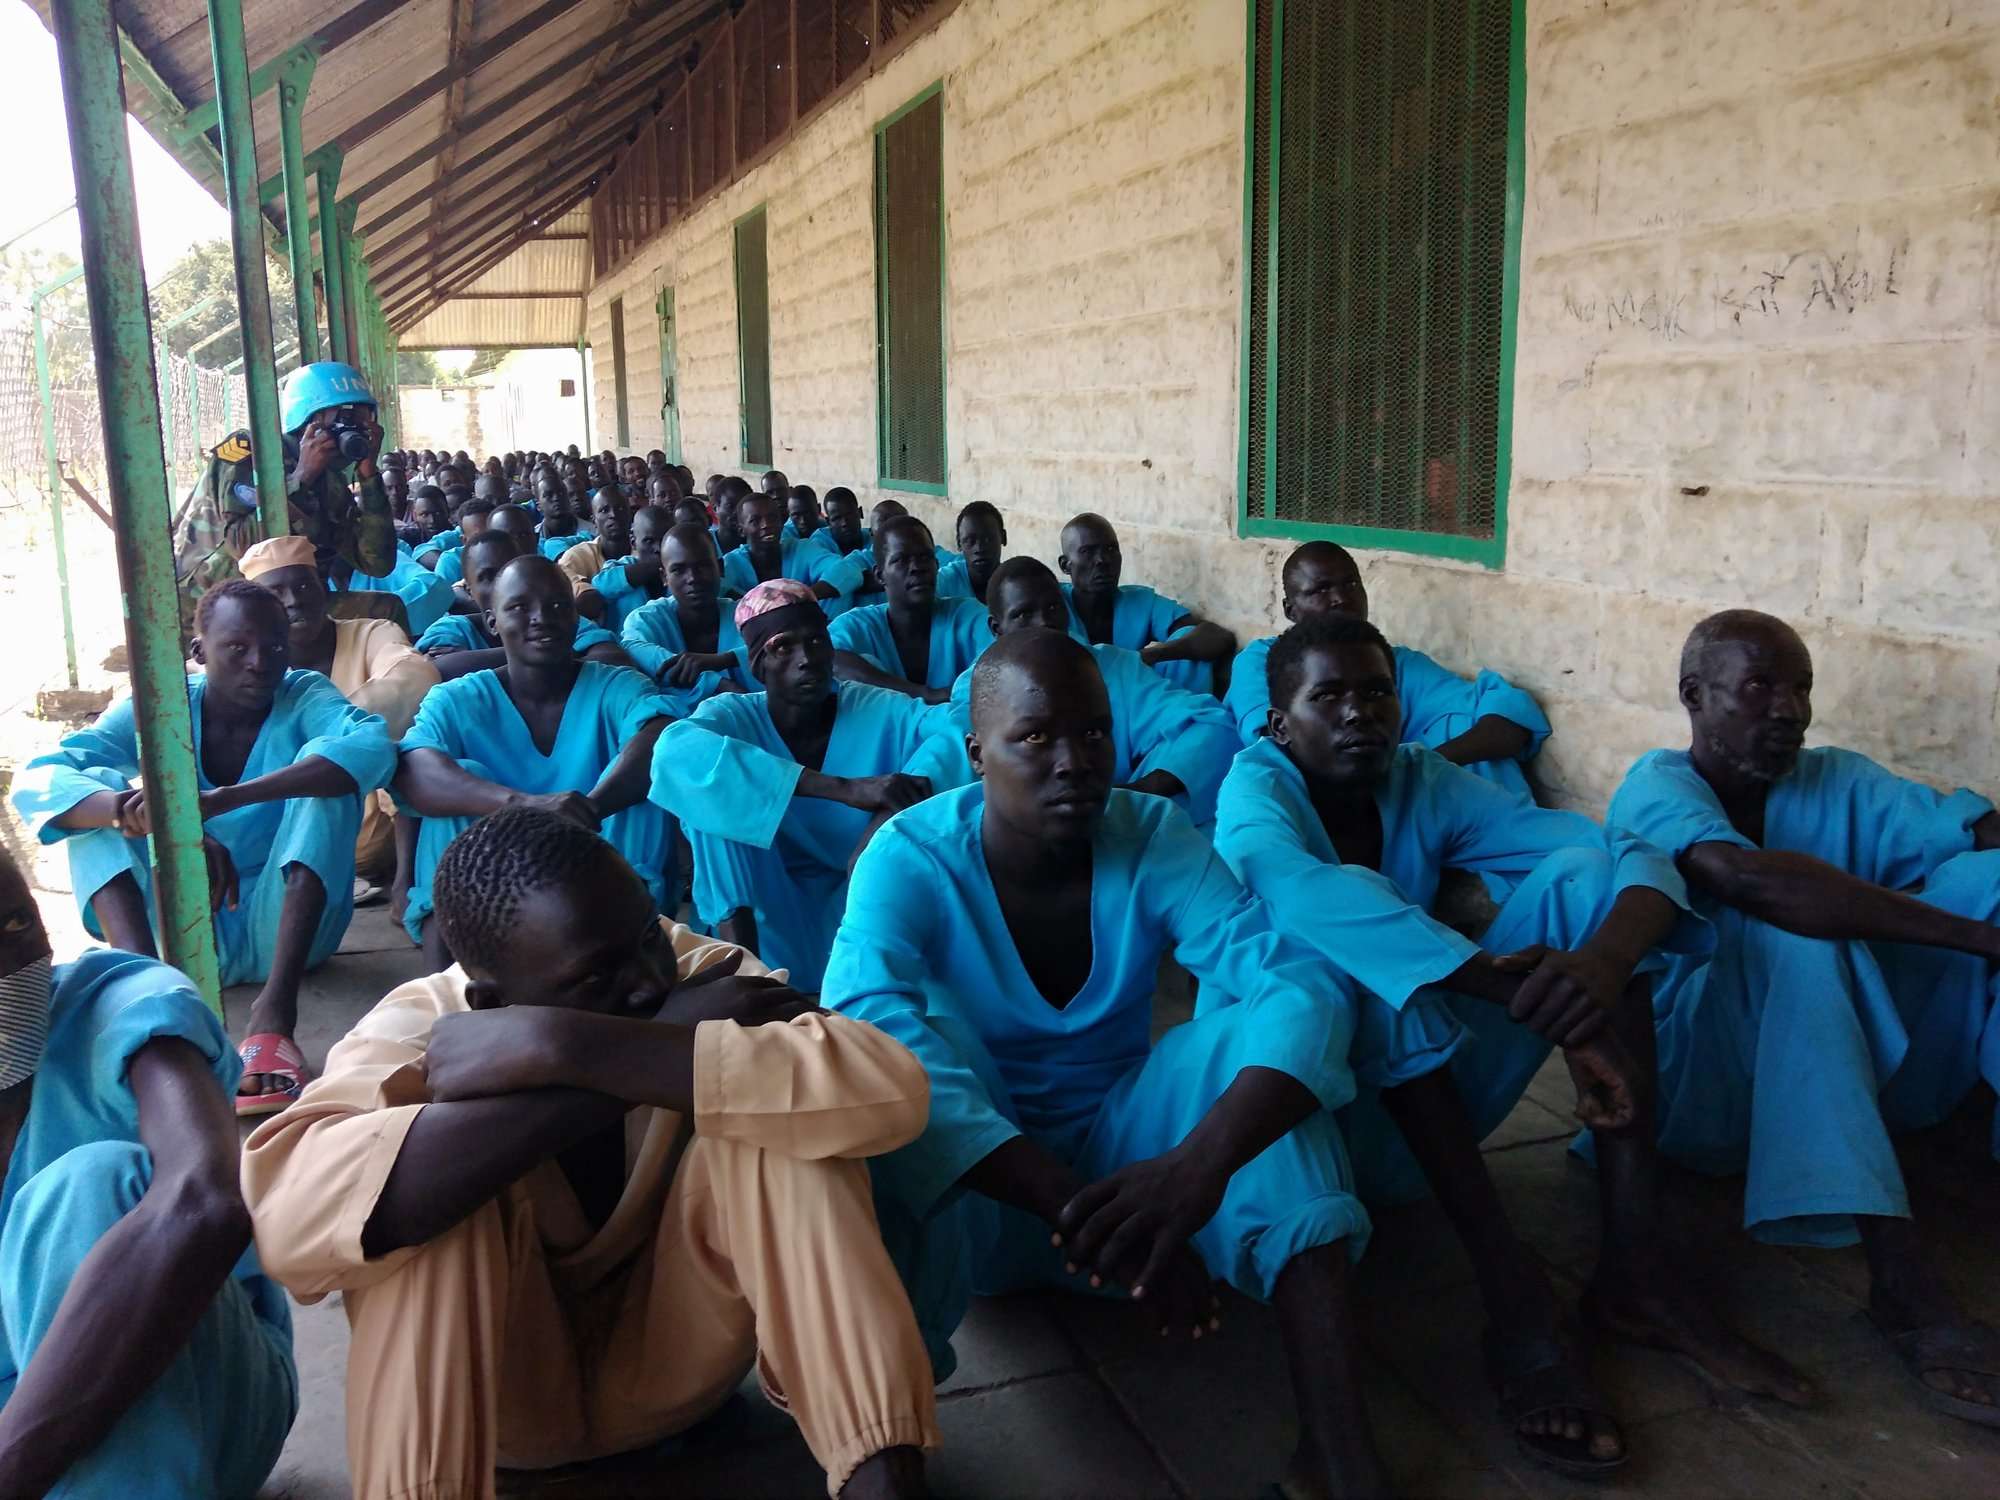 South Sudan prisons swell up with 12,000 inmates